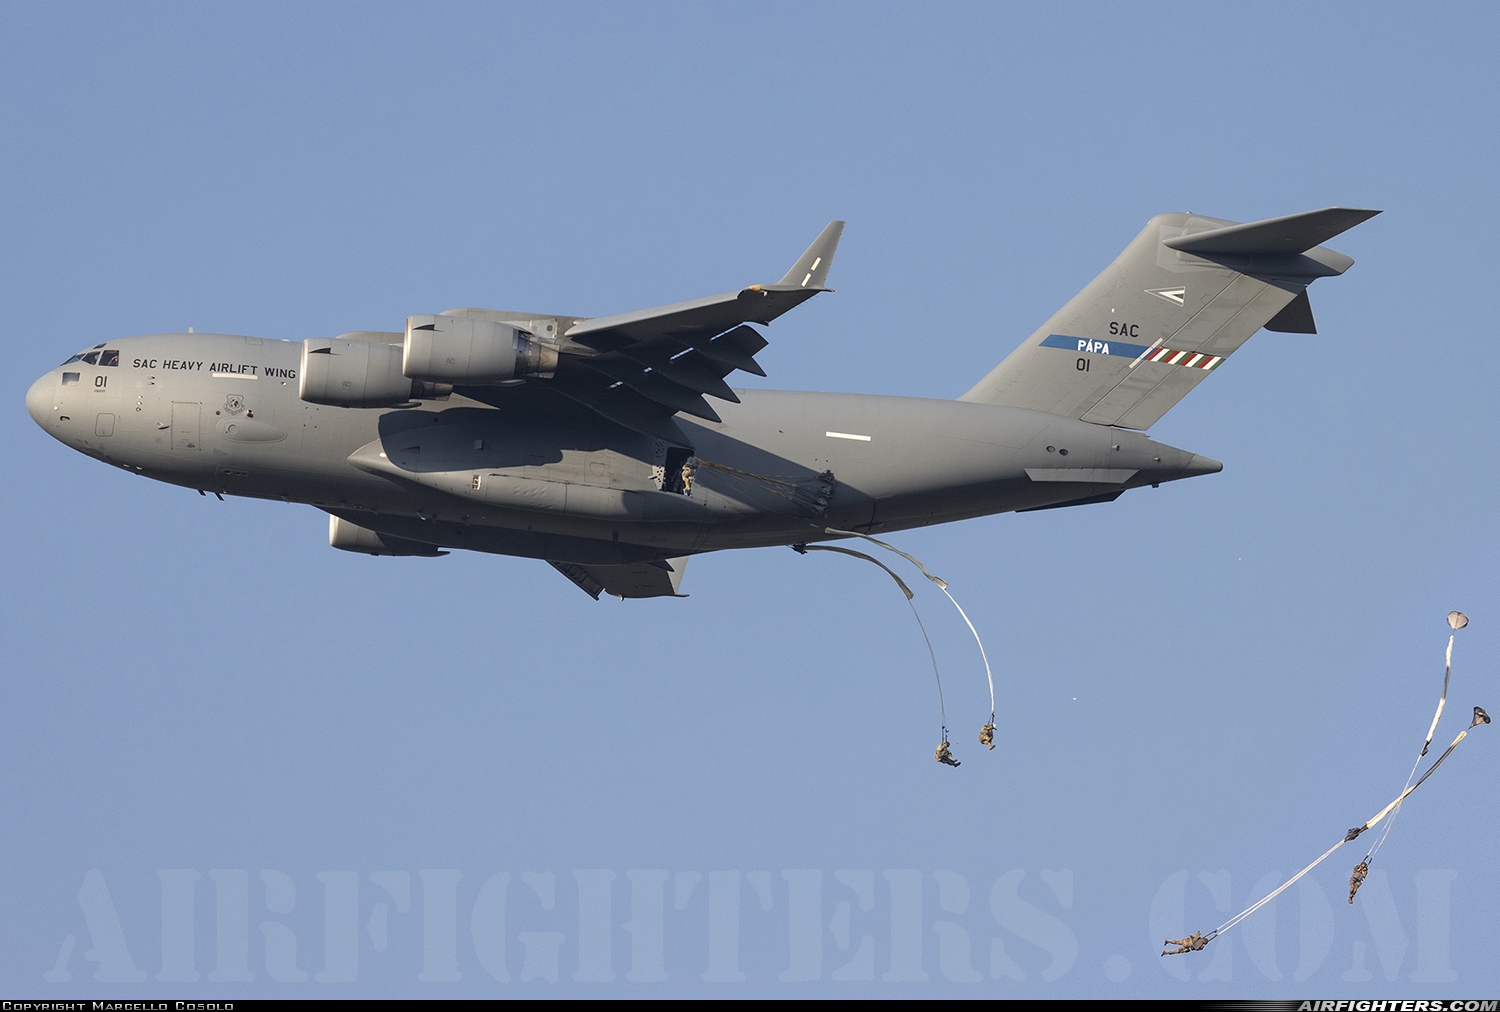 NATO - Strategic Airlift Capability Boeing C-17A Globemaster III 08-0001 at Off-Airport - Pordenone, Italy